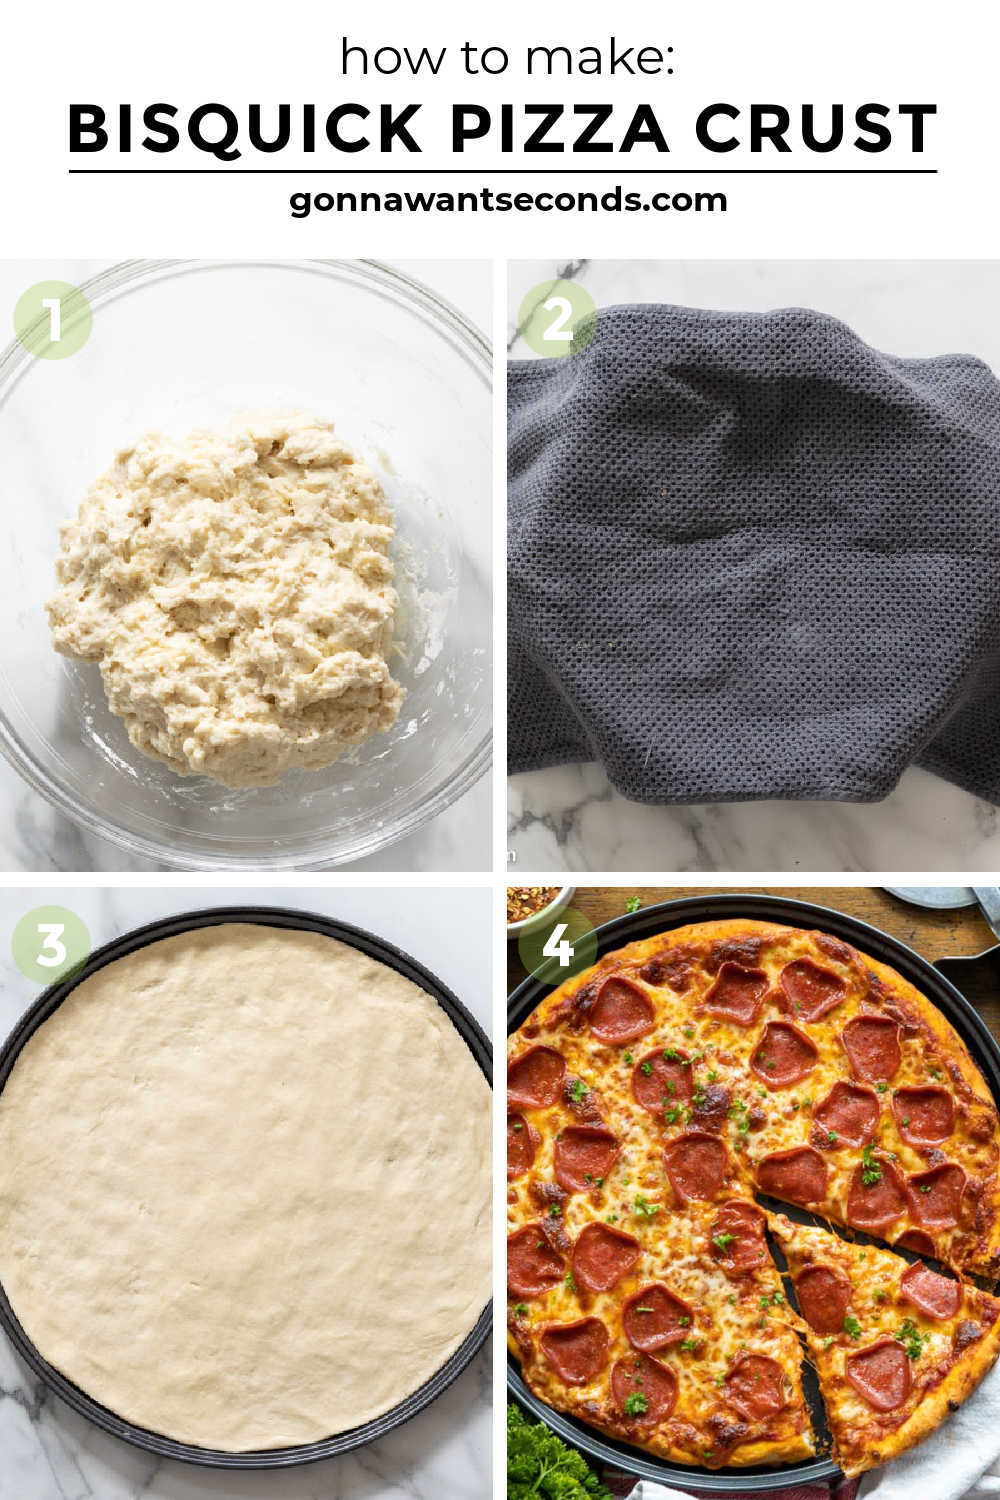 step by step How to make Bisquick pizza crust 